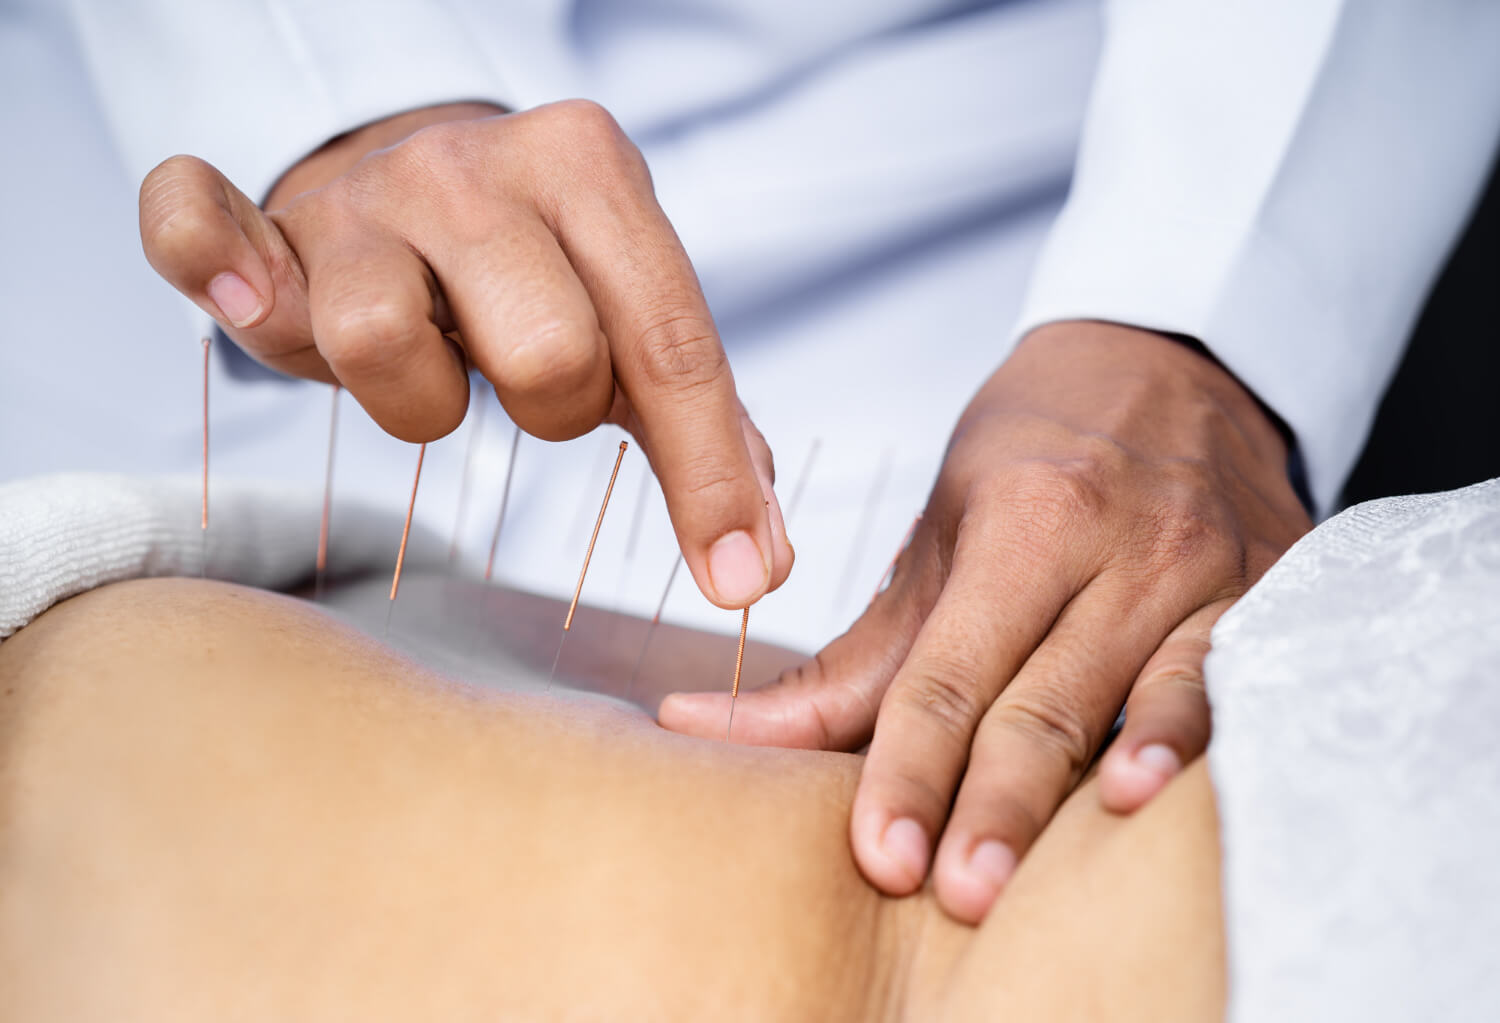 Why Choose Revitalize for Acupuncture Treatment?